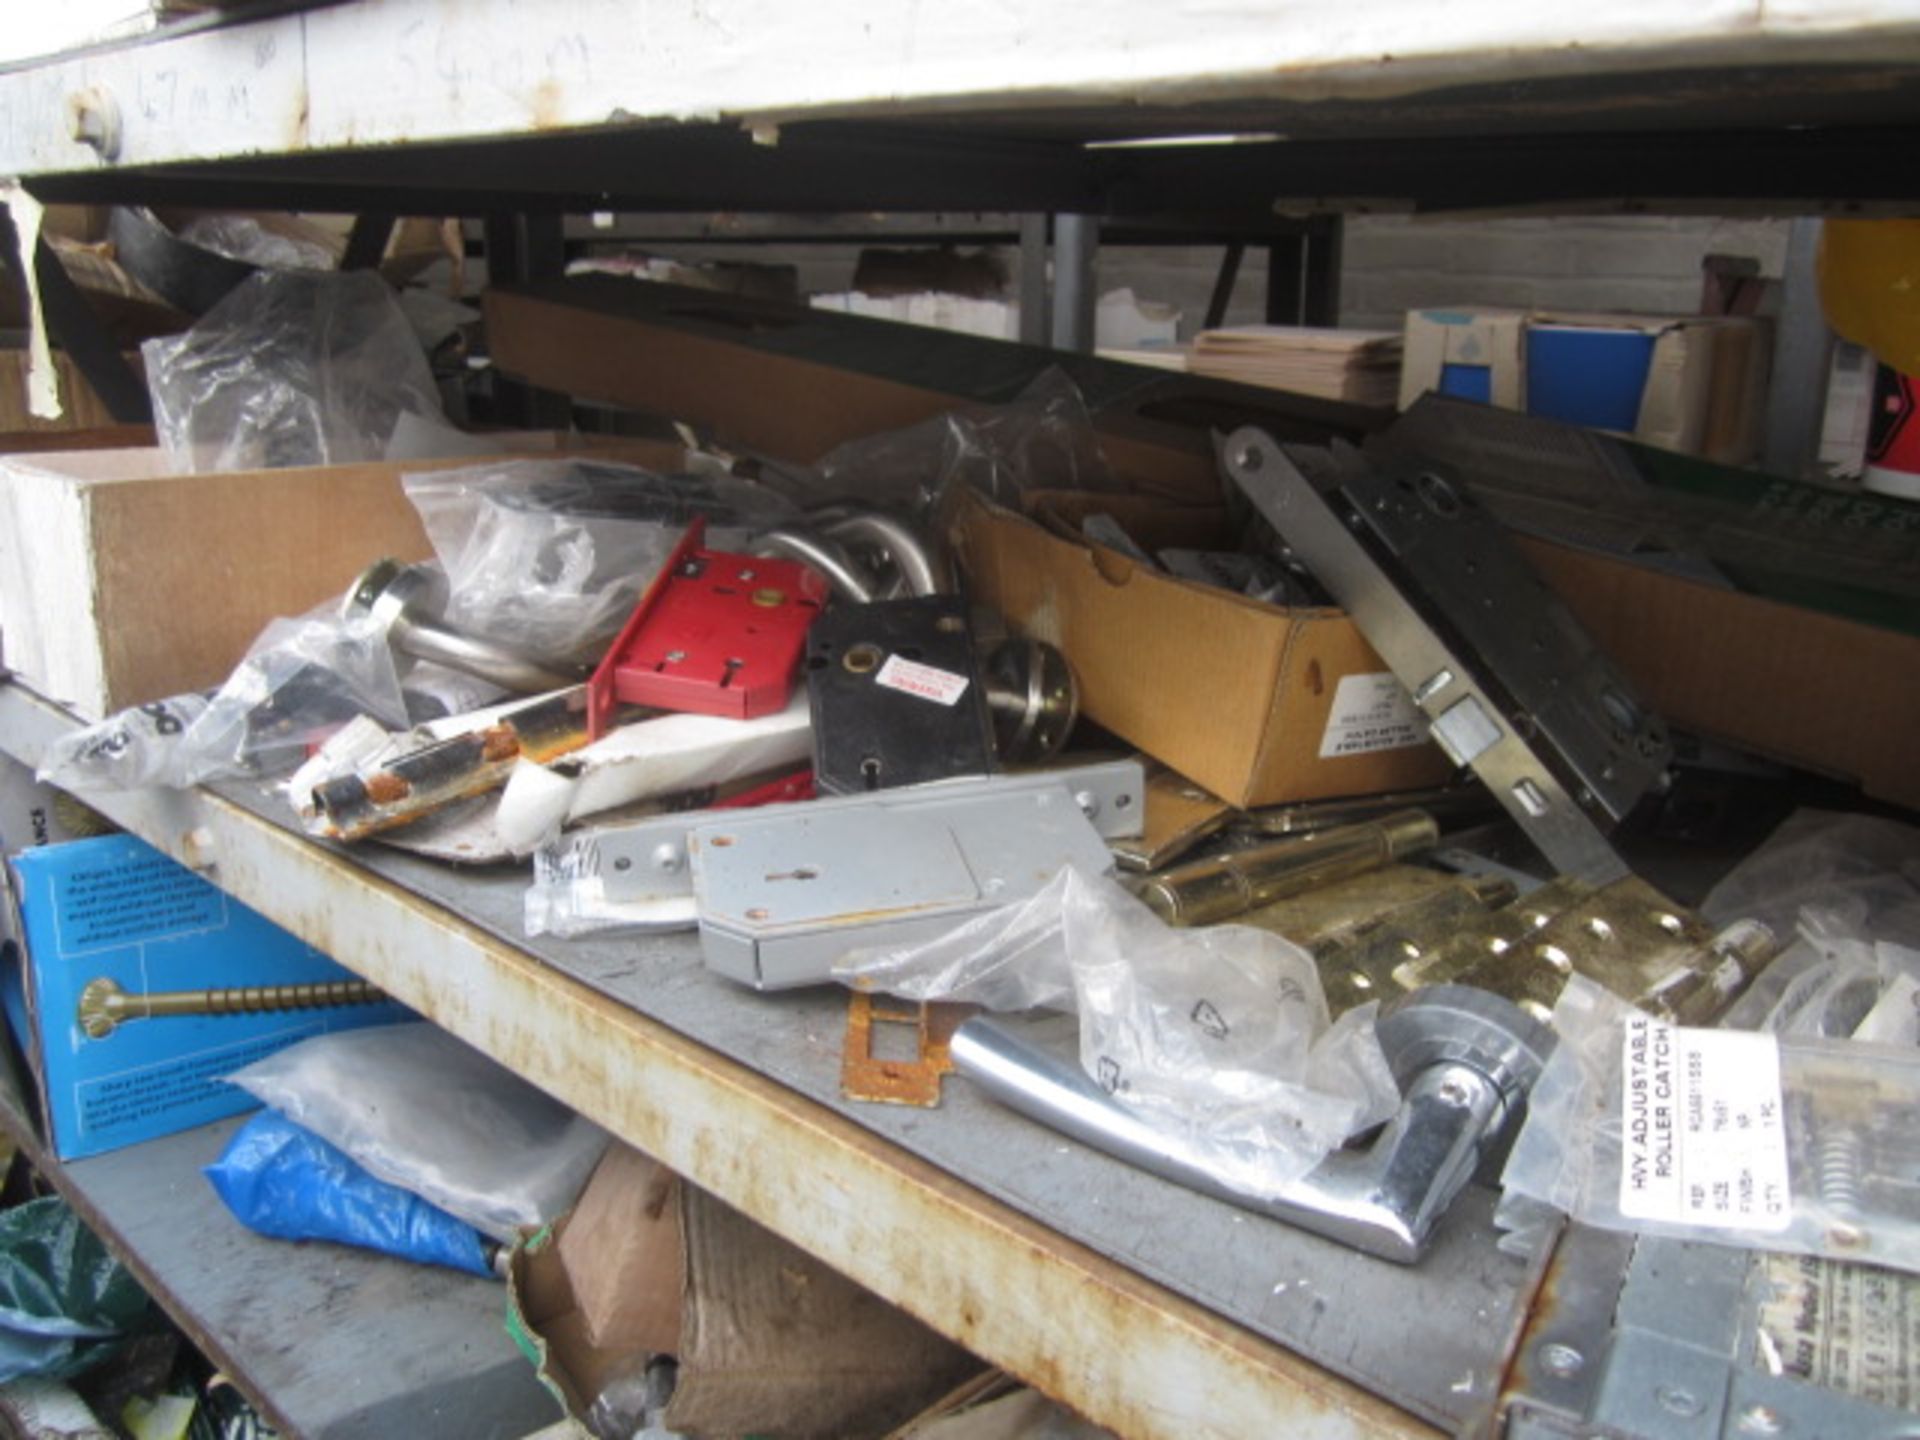 Contents of racking including locks, hangers, ironmongery, bolts, architectural hardwear etc. - Image 5 of 18